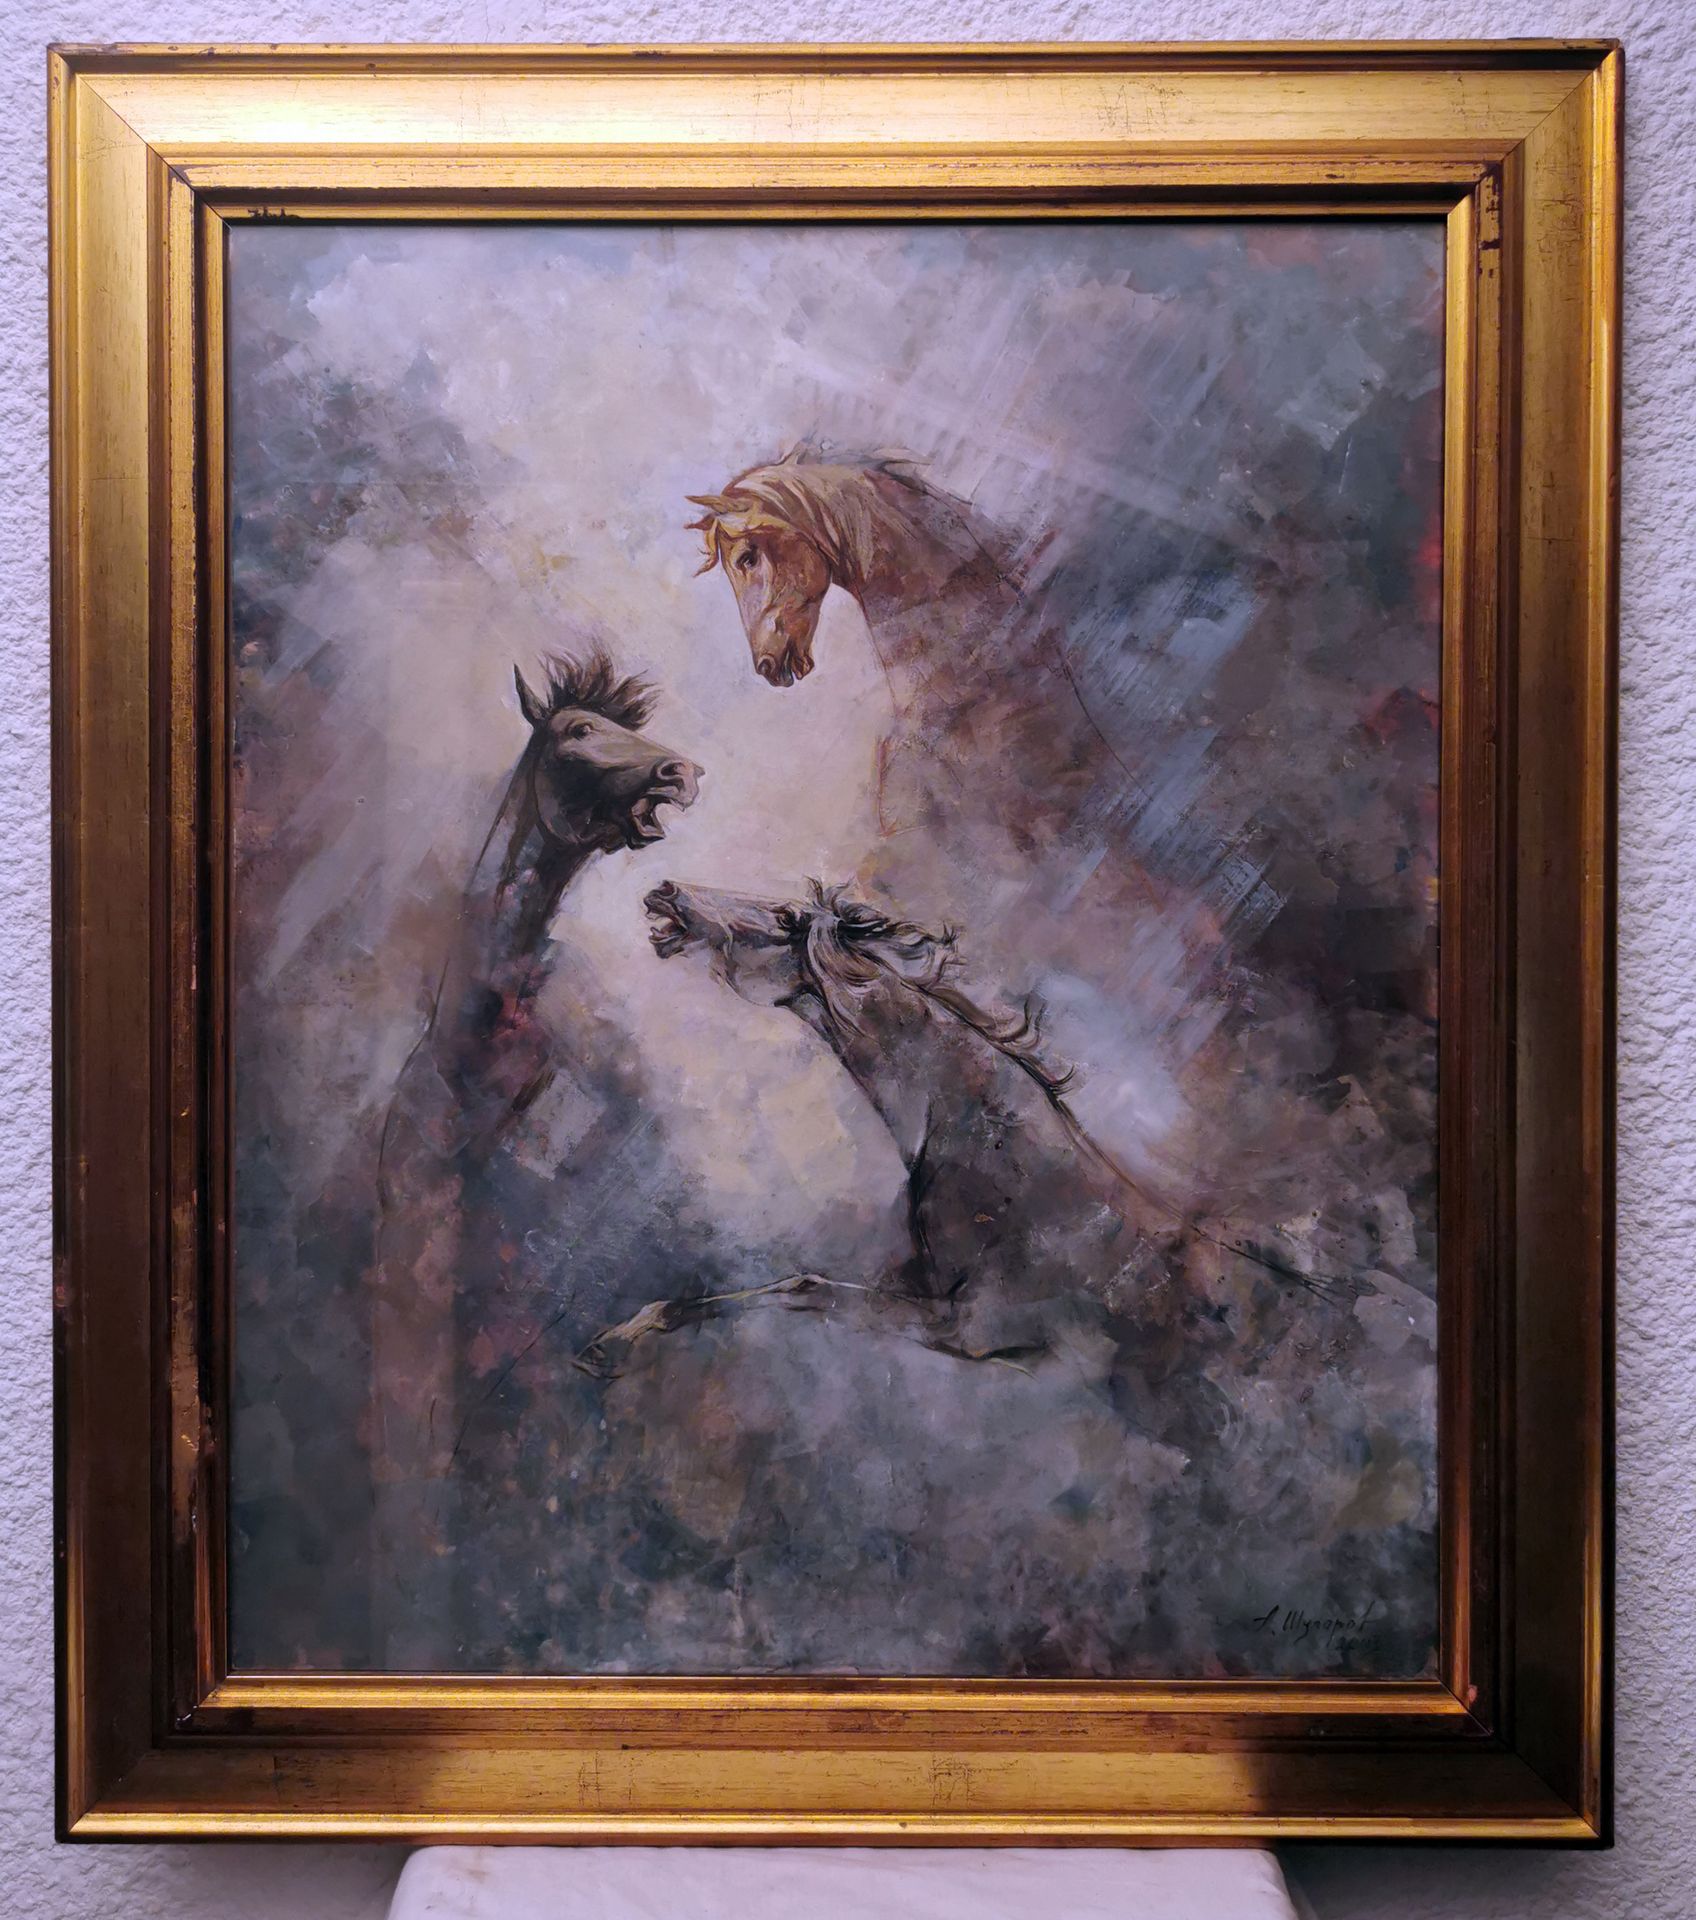 HIPAYOT HIYAPOT SBDD 2003 "THE HORSES" HSP WITHOUT FRAME 55X68 AND 71X81,5